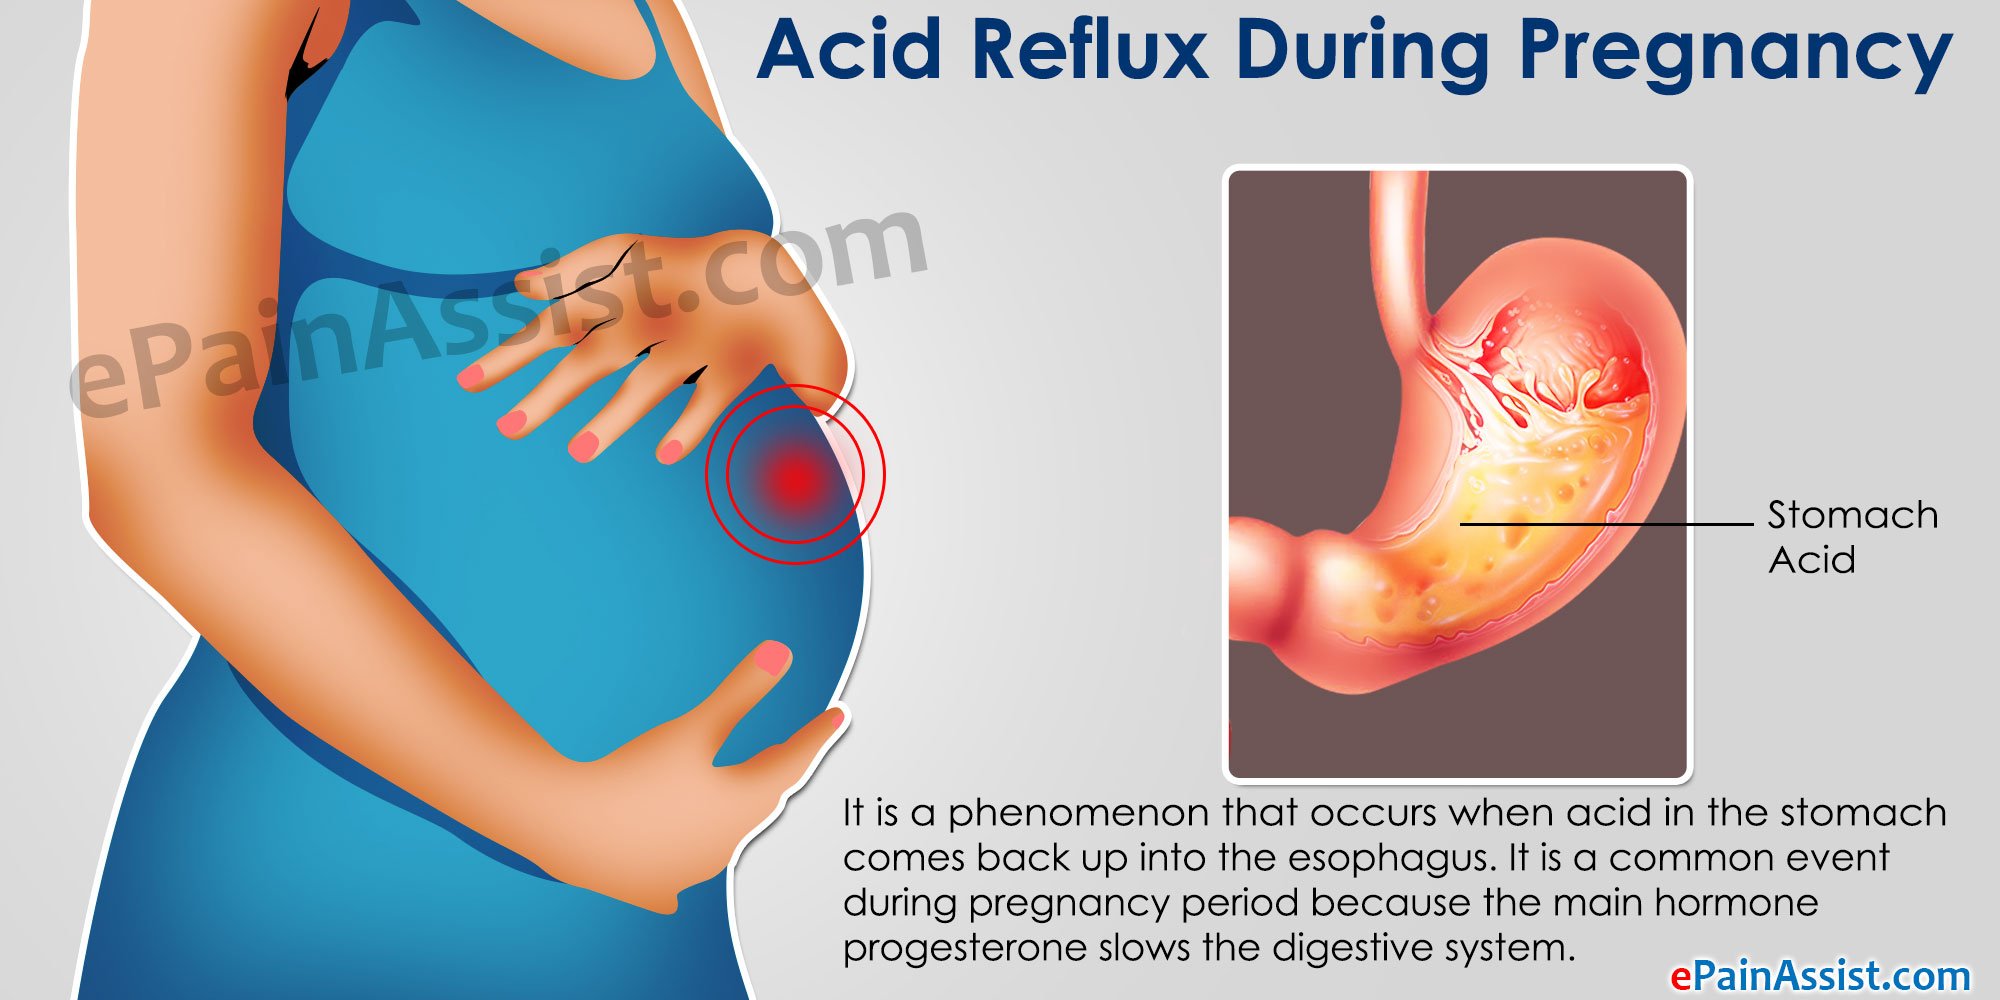 Acid Reflux During Pregnancy: Home Remedies and Lifestyle ...